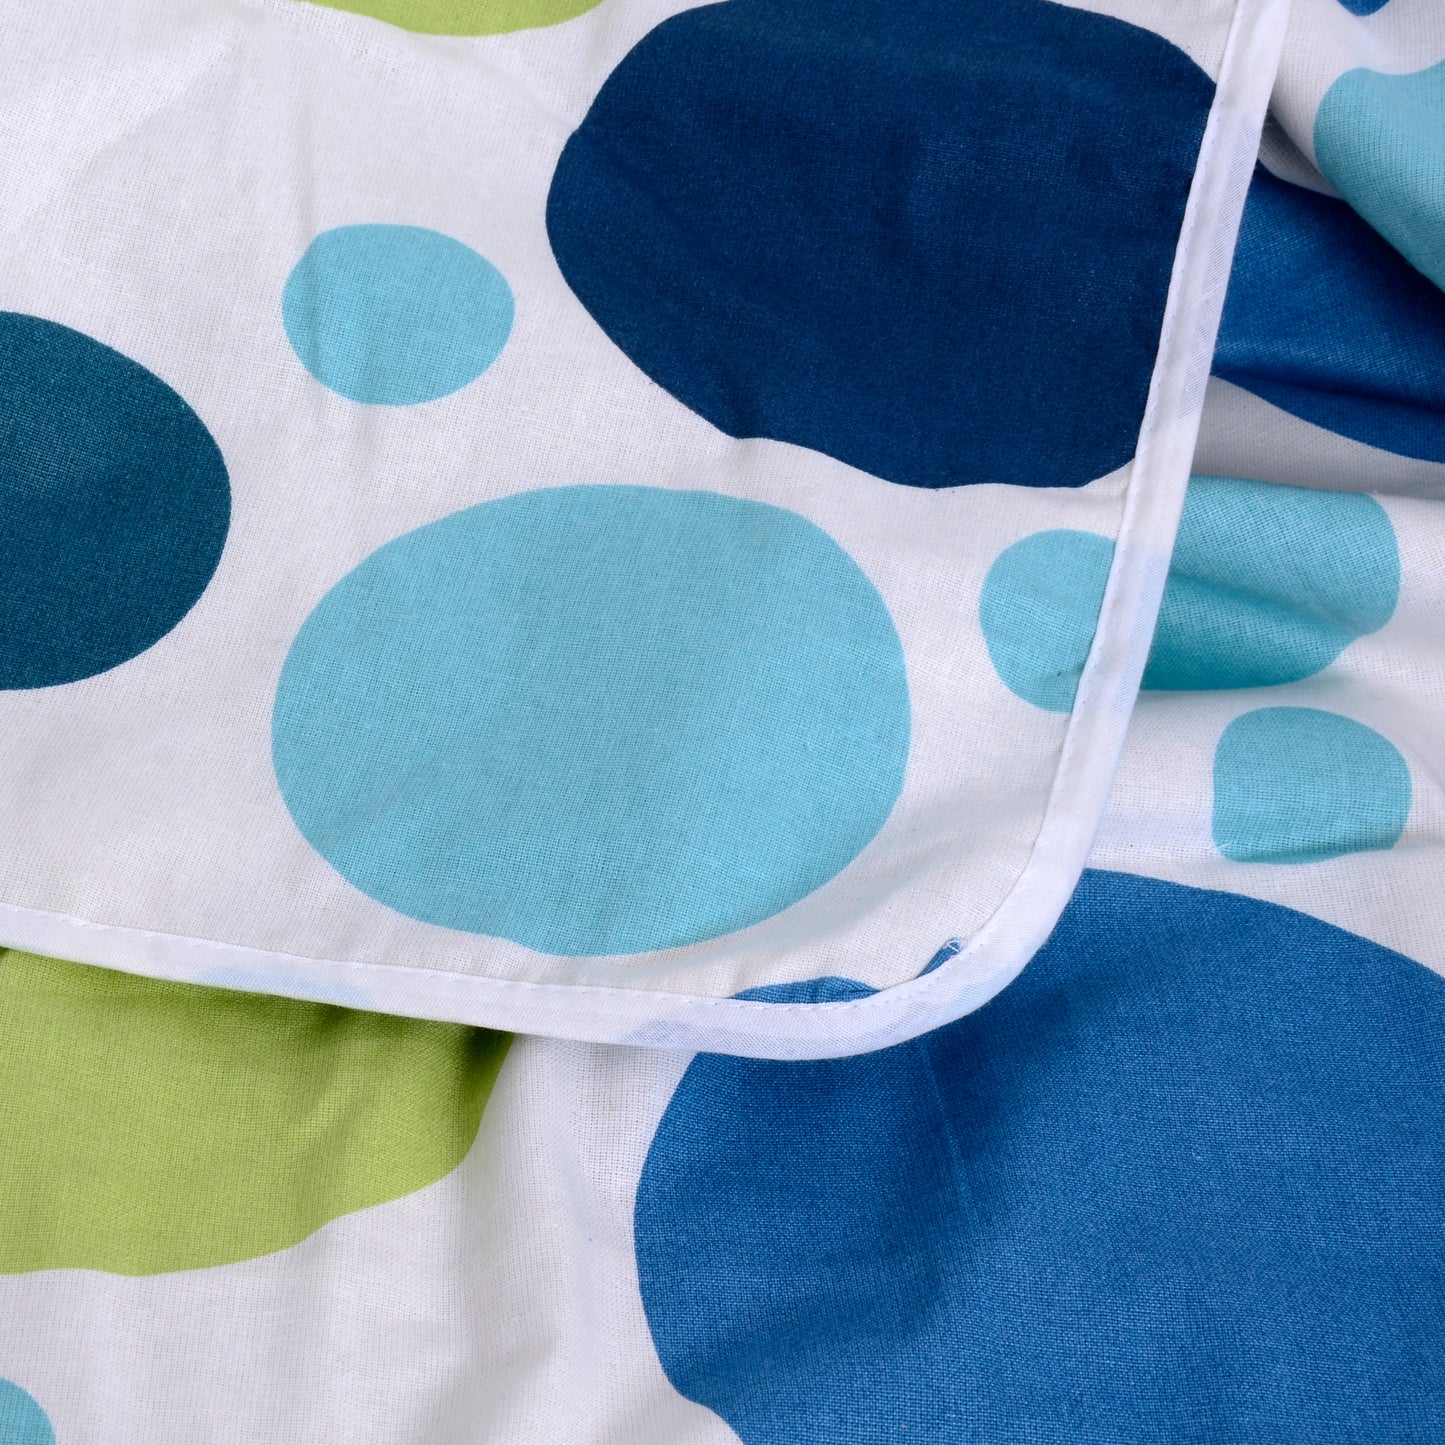 Blue And White 144 TC 100% Cotton Polka Dotted Single Bed AC Blanket Dohar for All Season